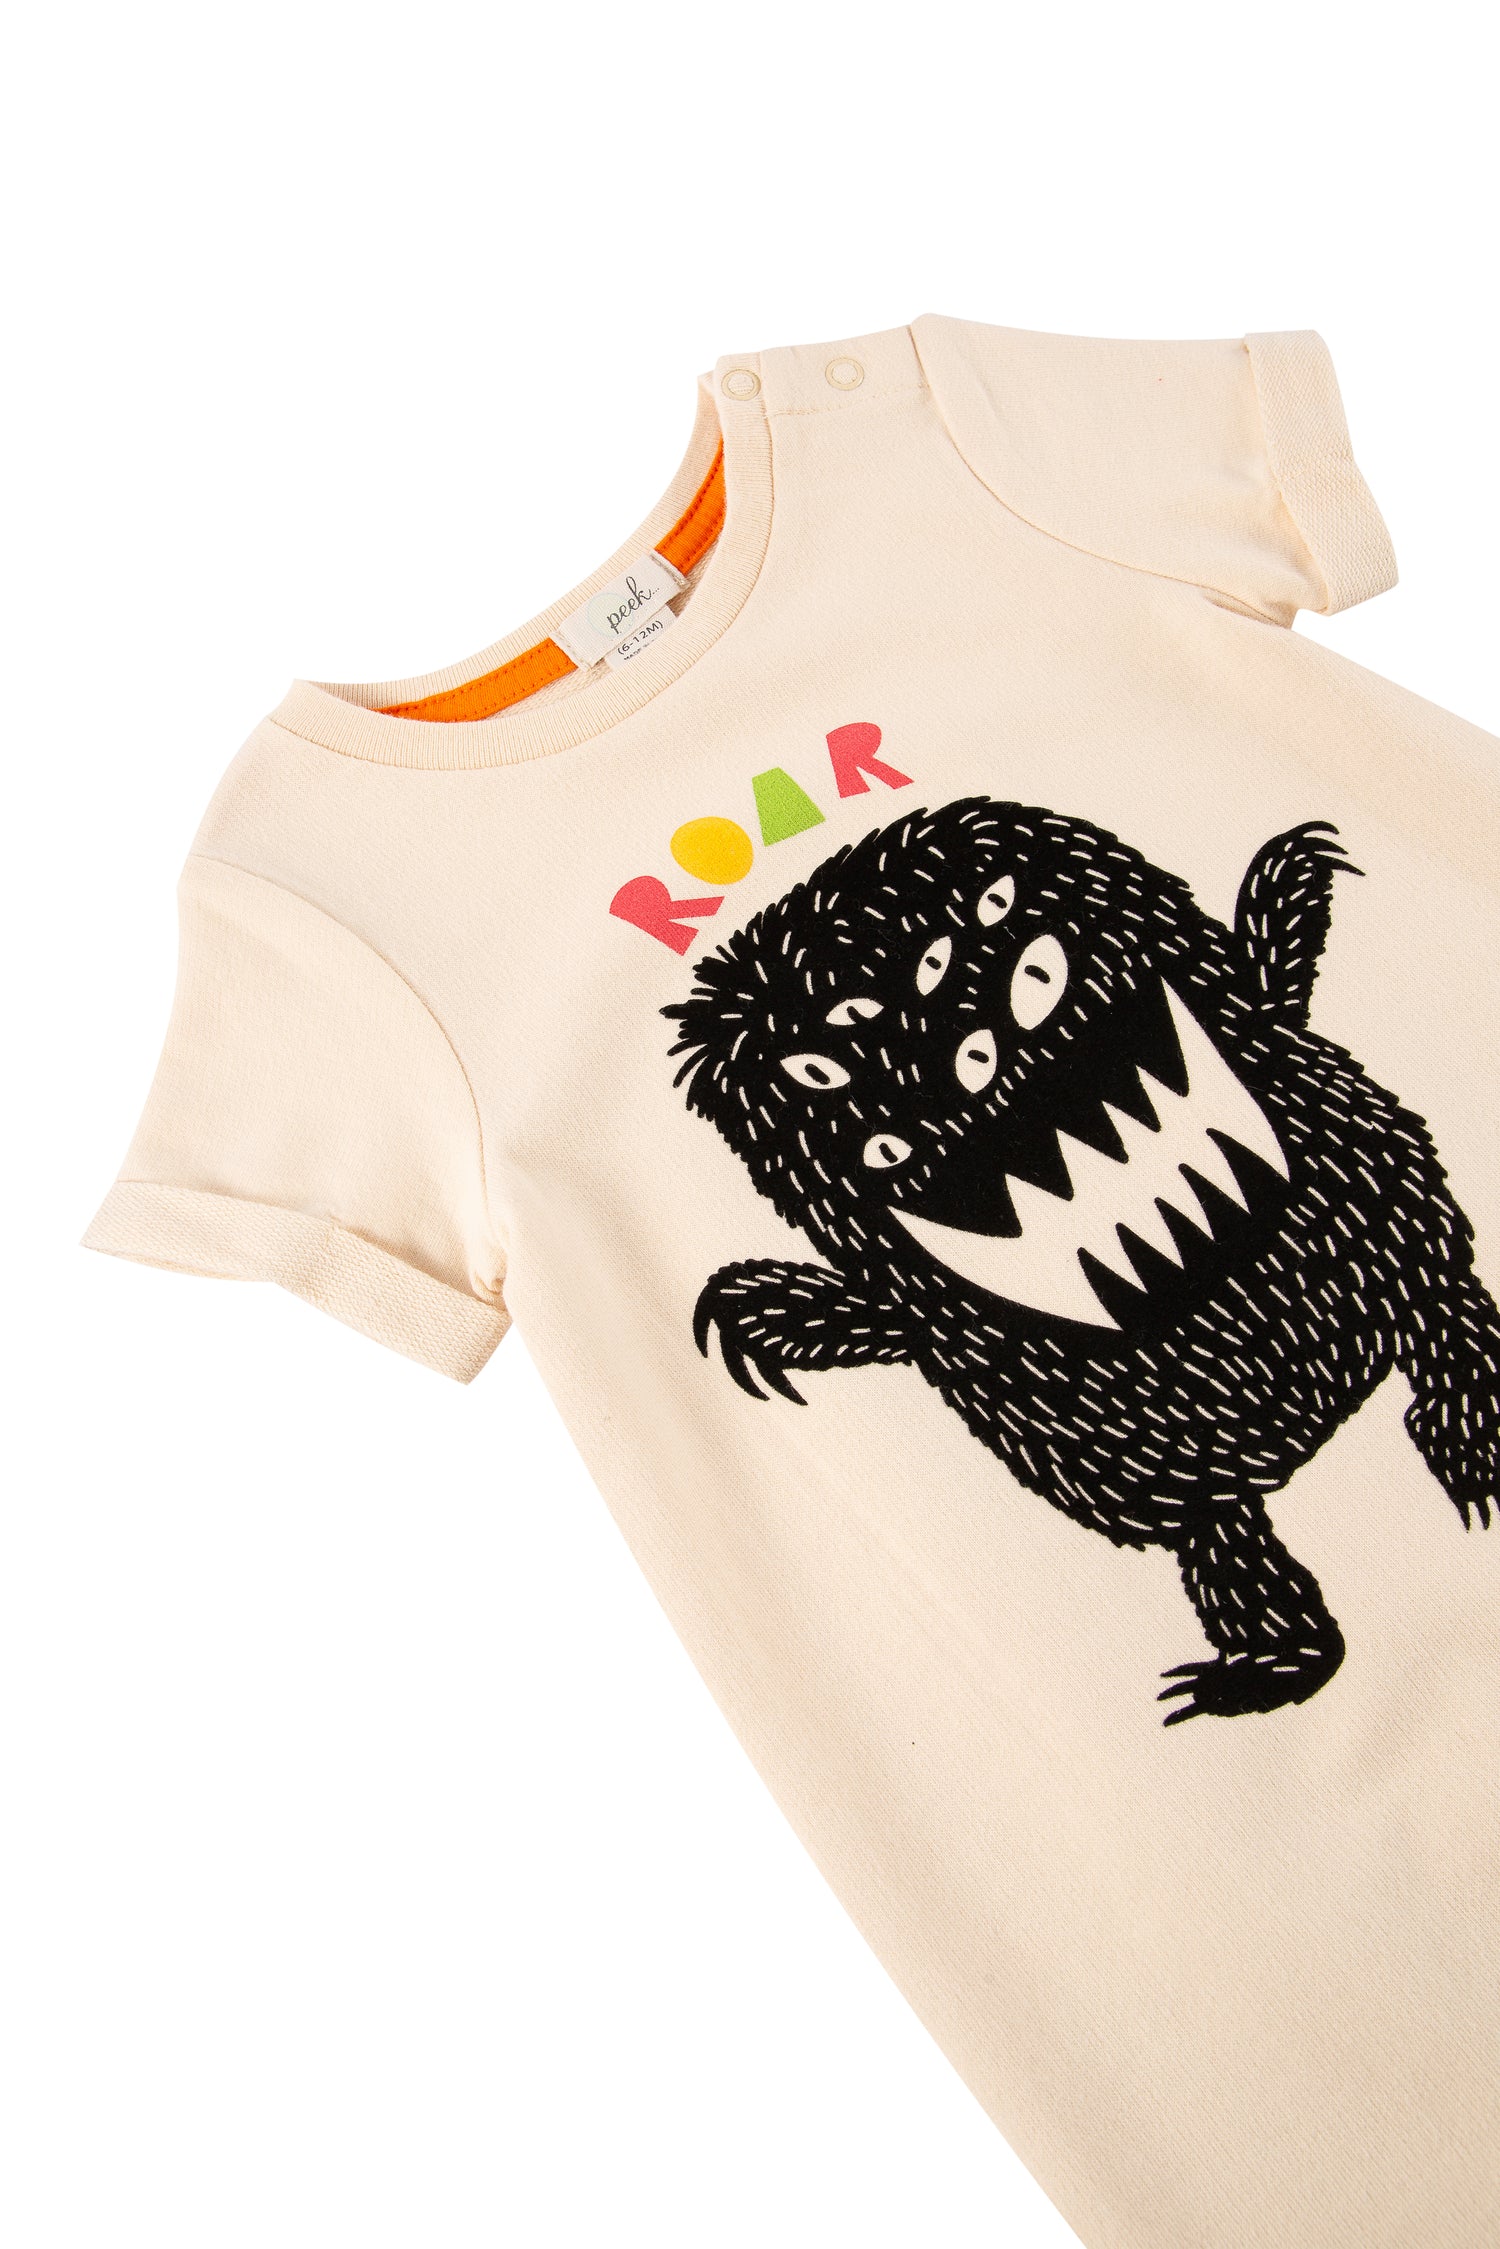 Close up of peach romper with monster illustration and text 'Roar'